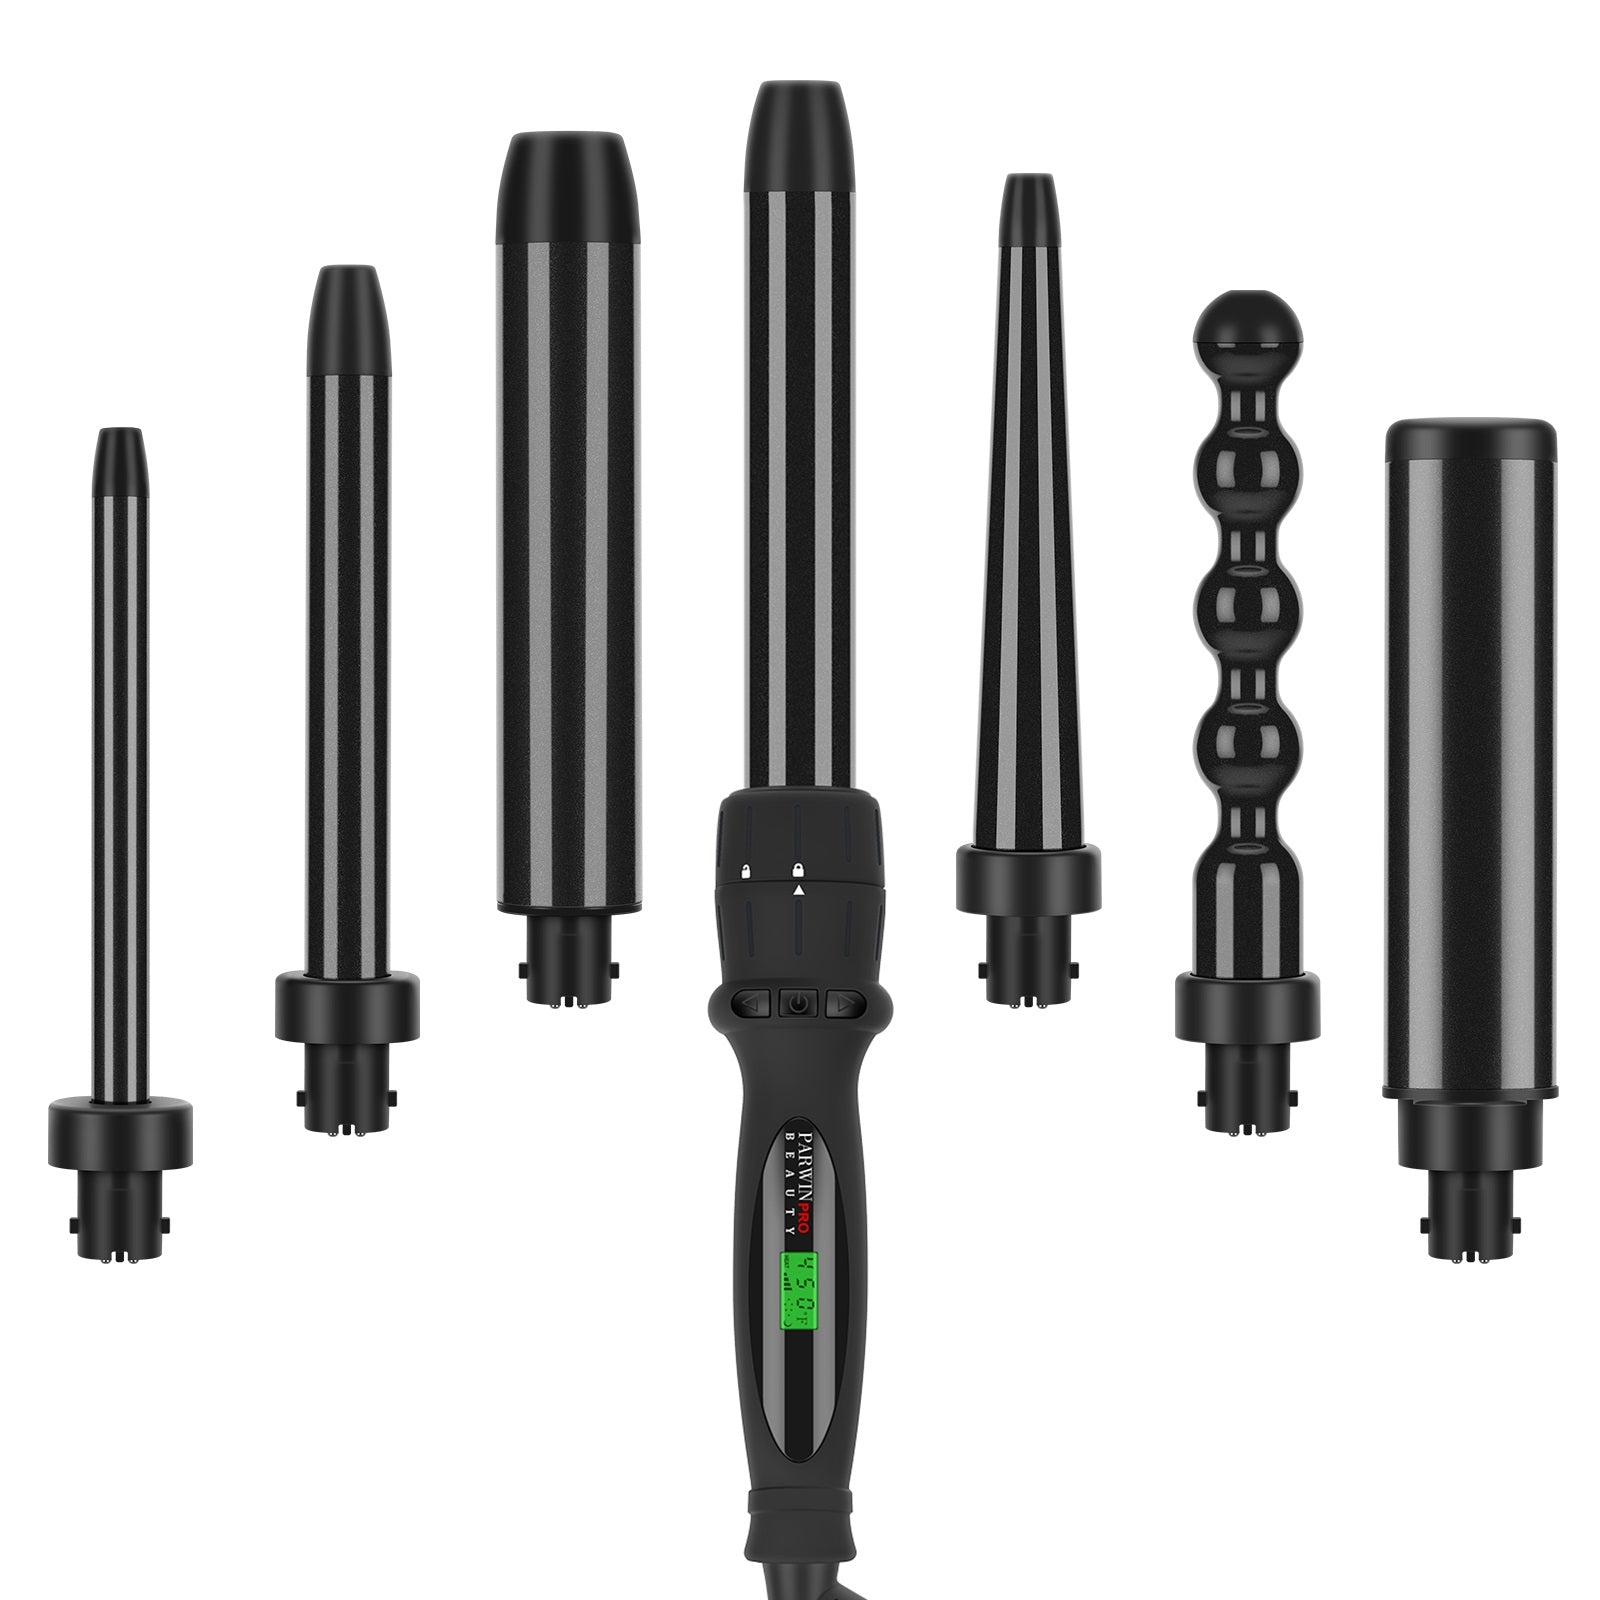 7 in 1 Curling Iron Wand Set – Haircaresshop